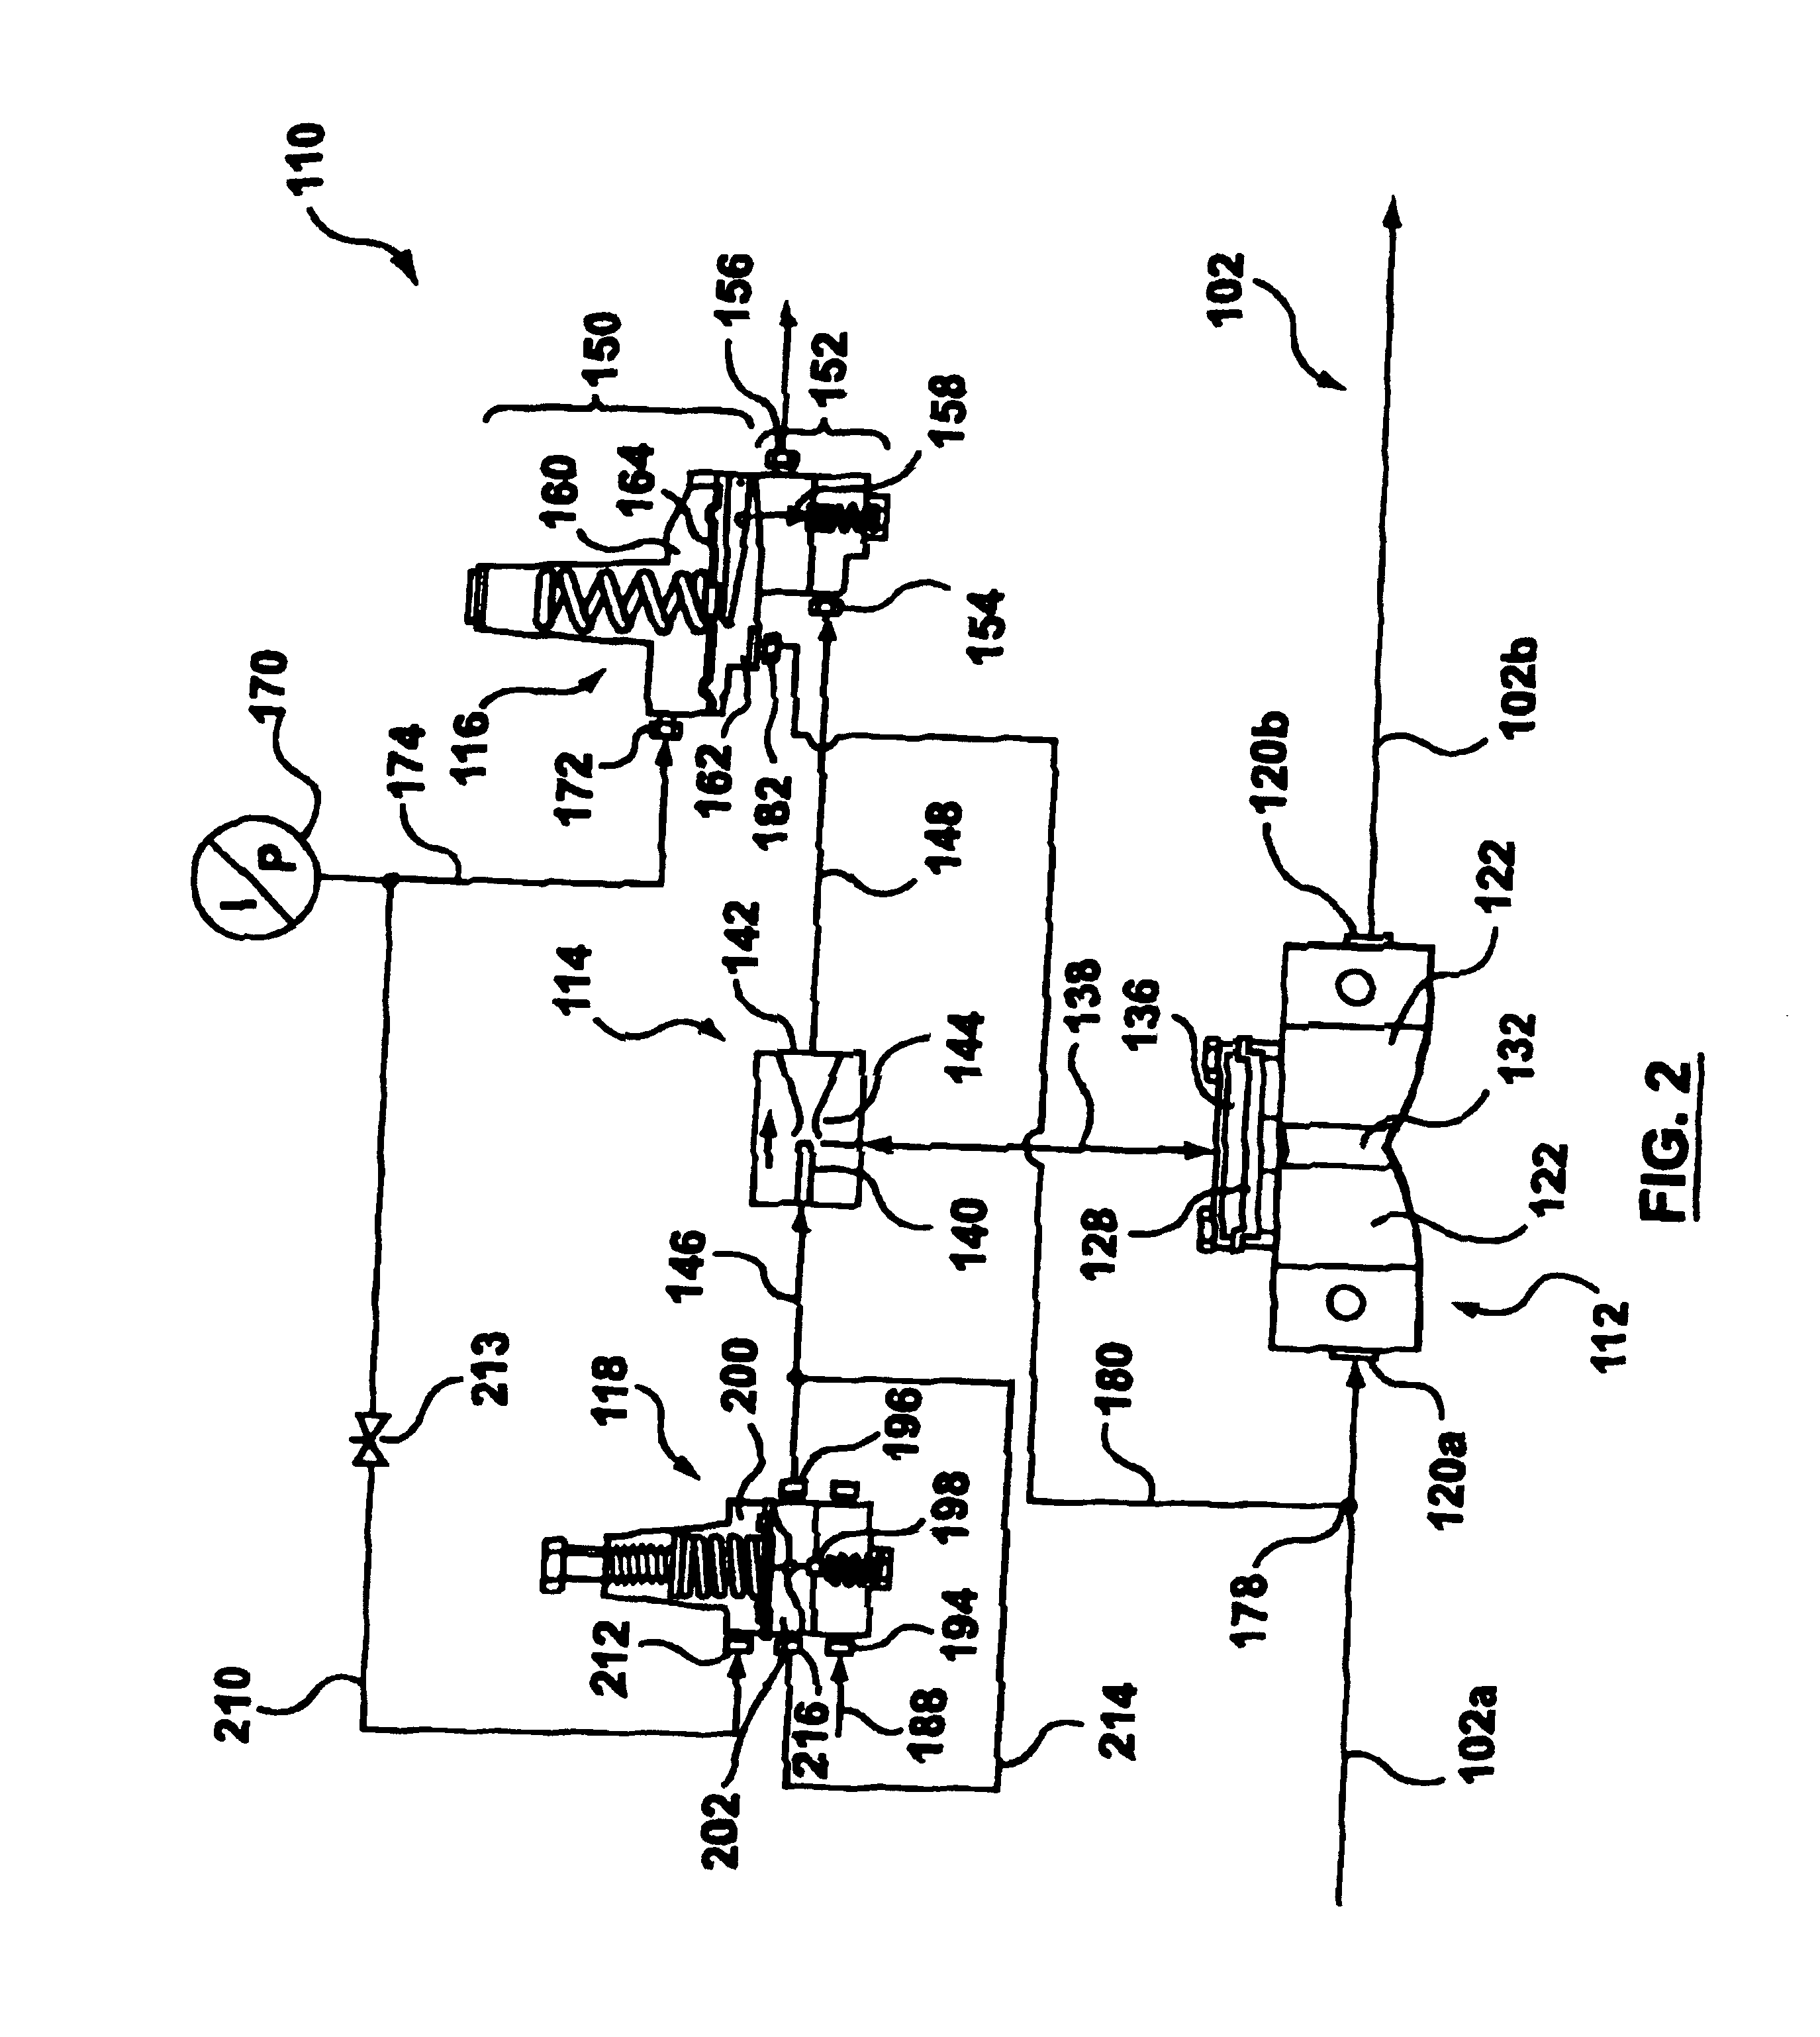 Pressure control system for low pressure operation